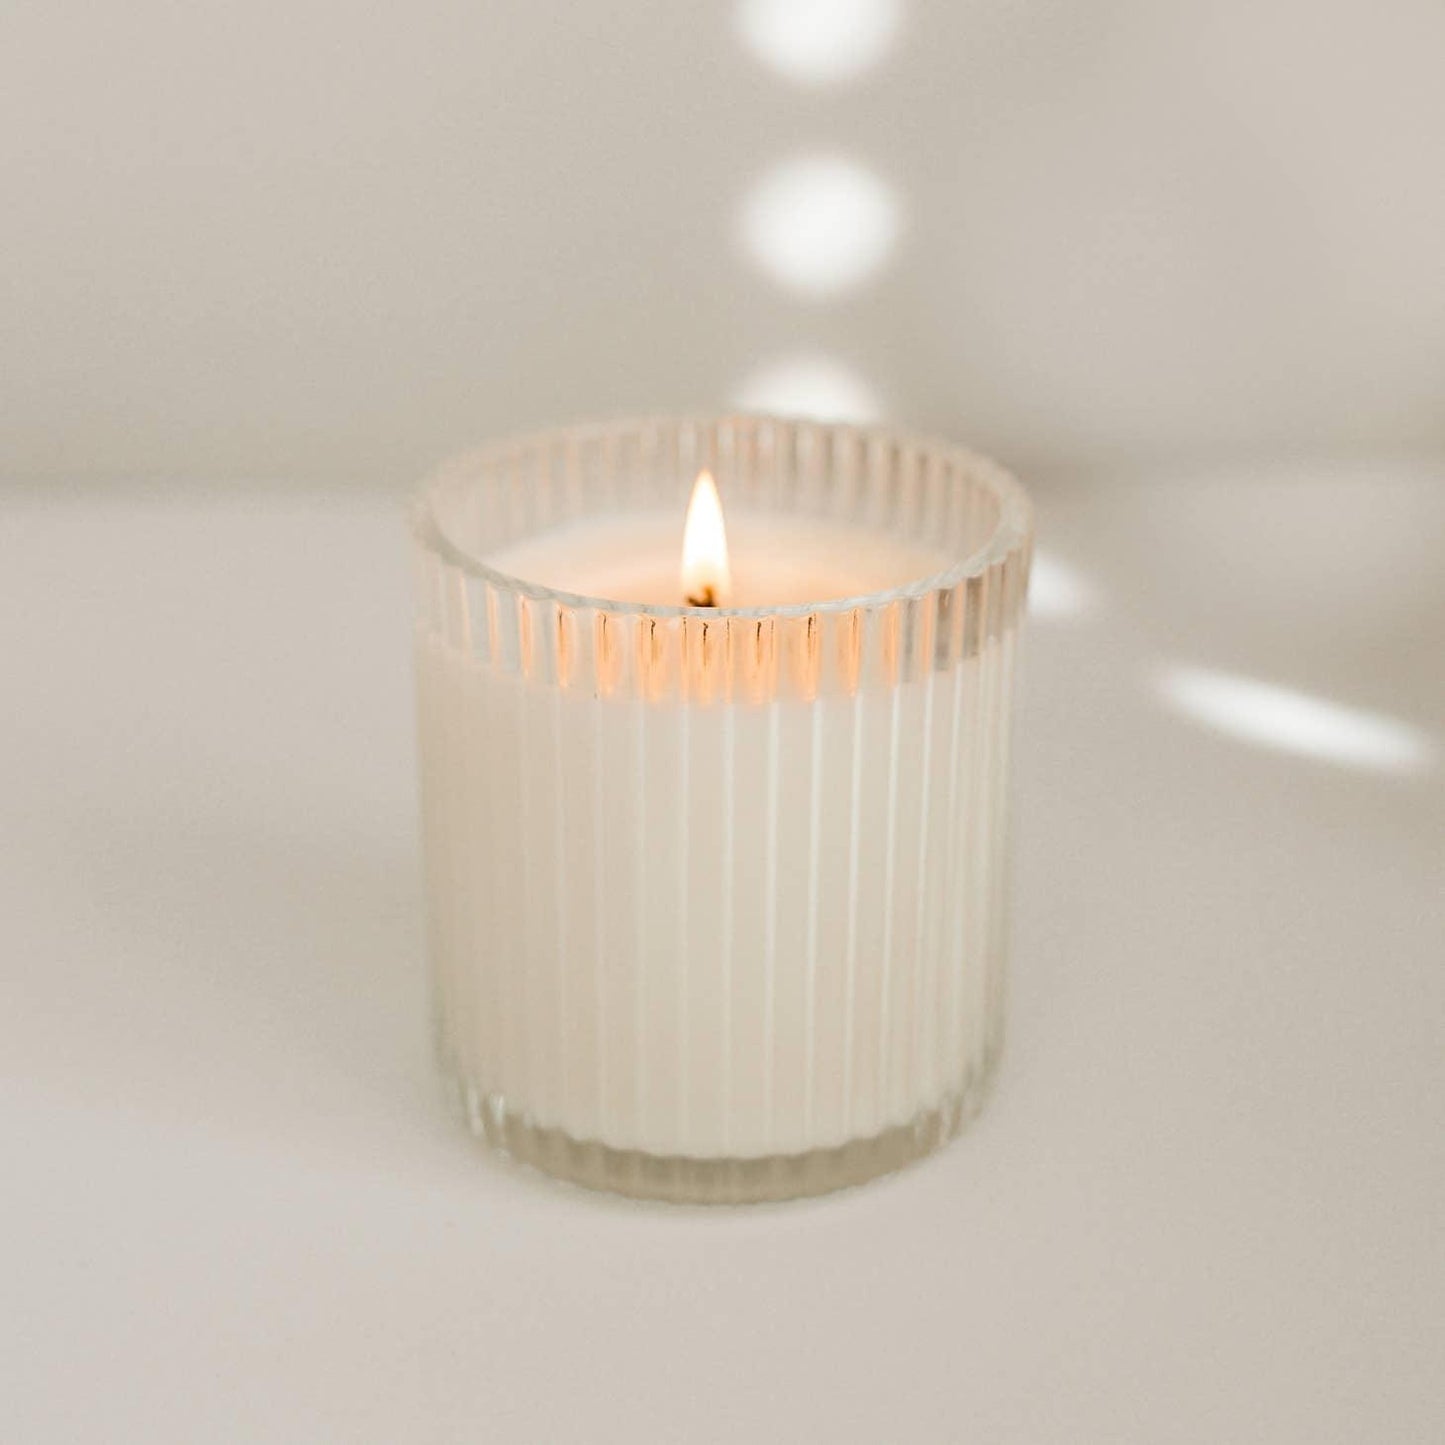 Ripped Jar | Candles - CURATED BY MAVENS, LTD.